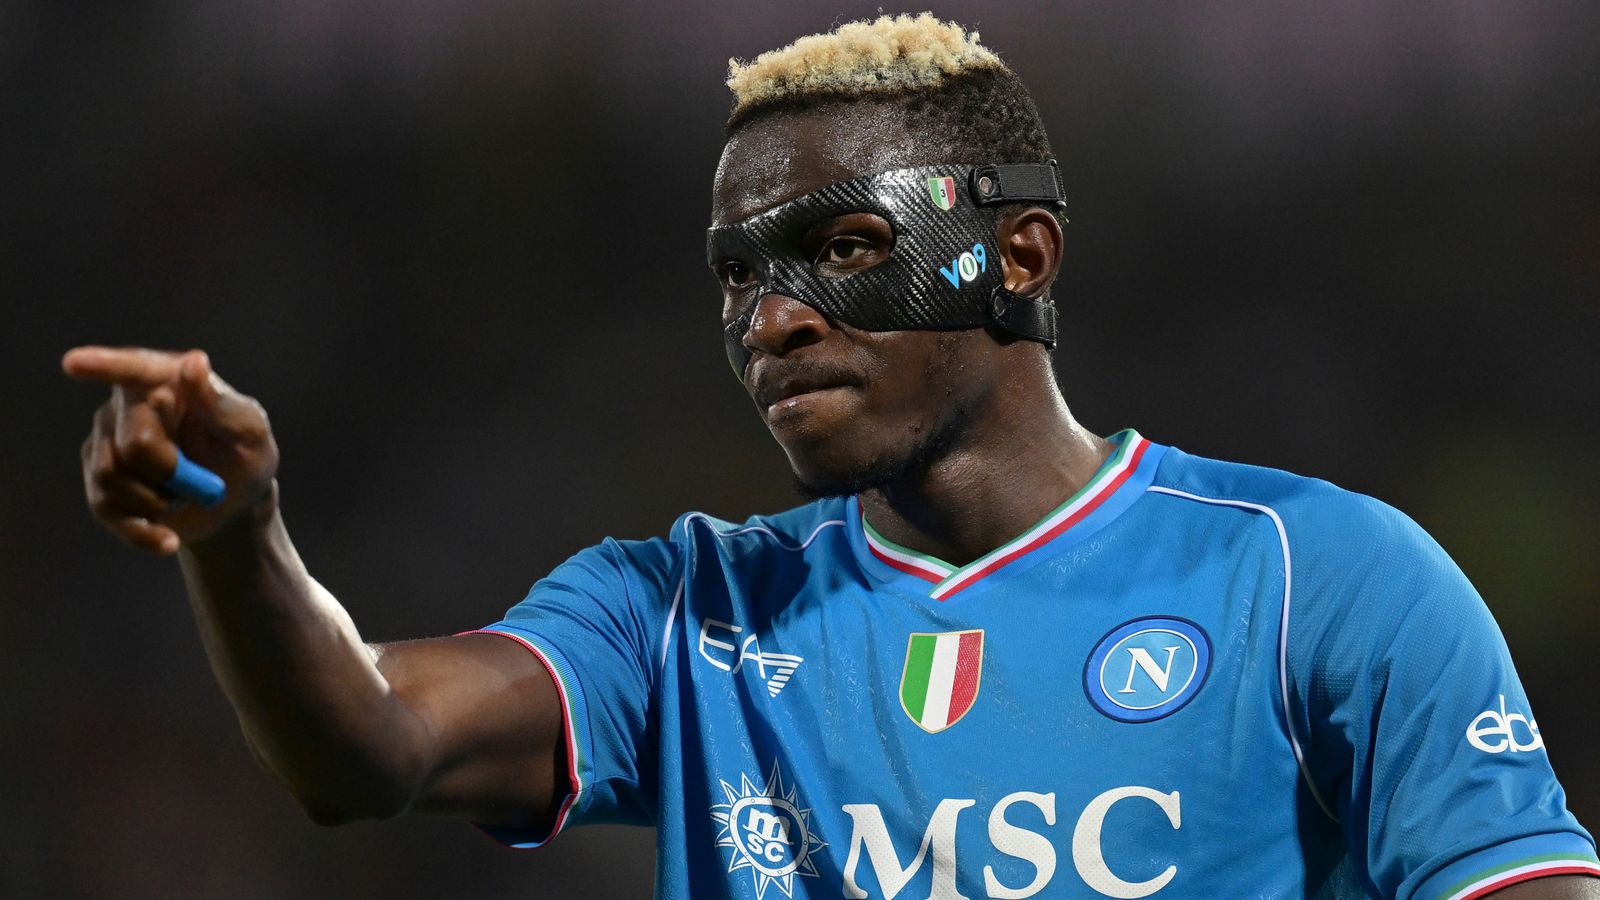 Napoli ‘never meant to offend or mock’ Victor Osimhen but stop short of apology for TikTok